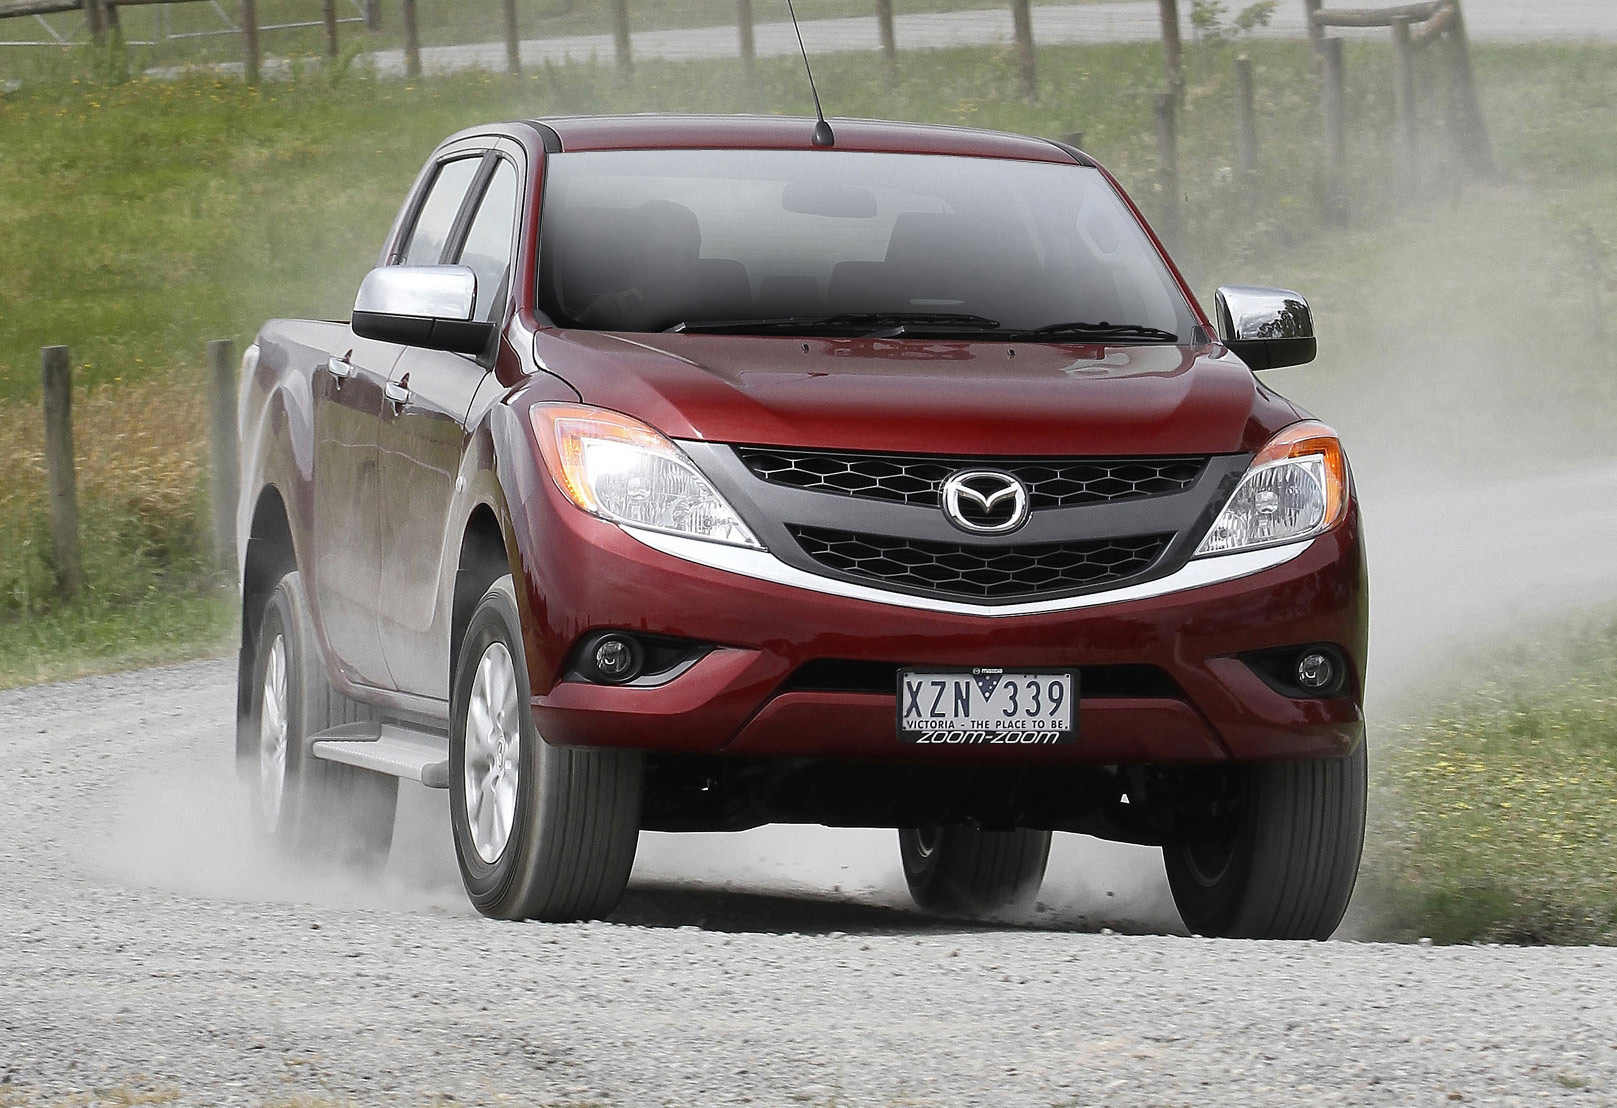 The all-new 2012 Mazda BT-50 will arrive in Australian showrooms later this